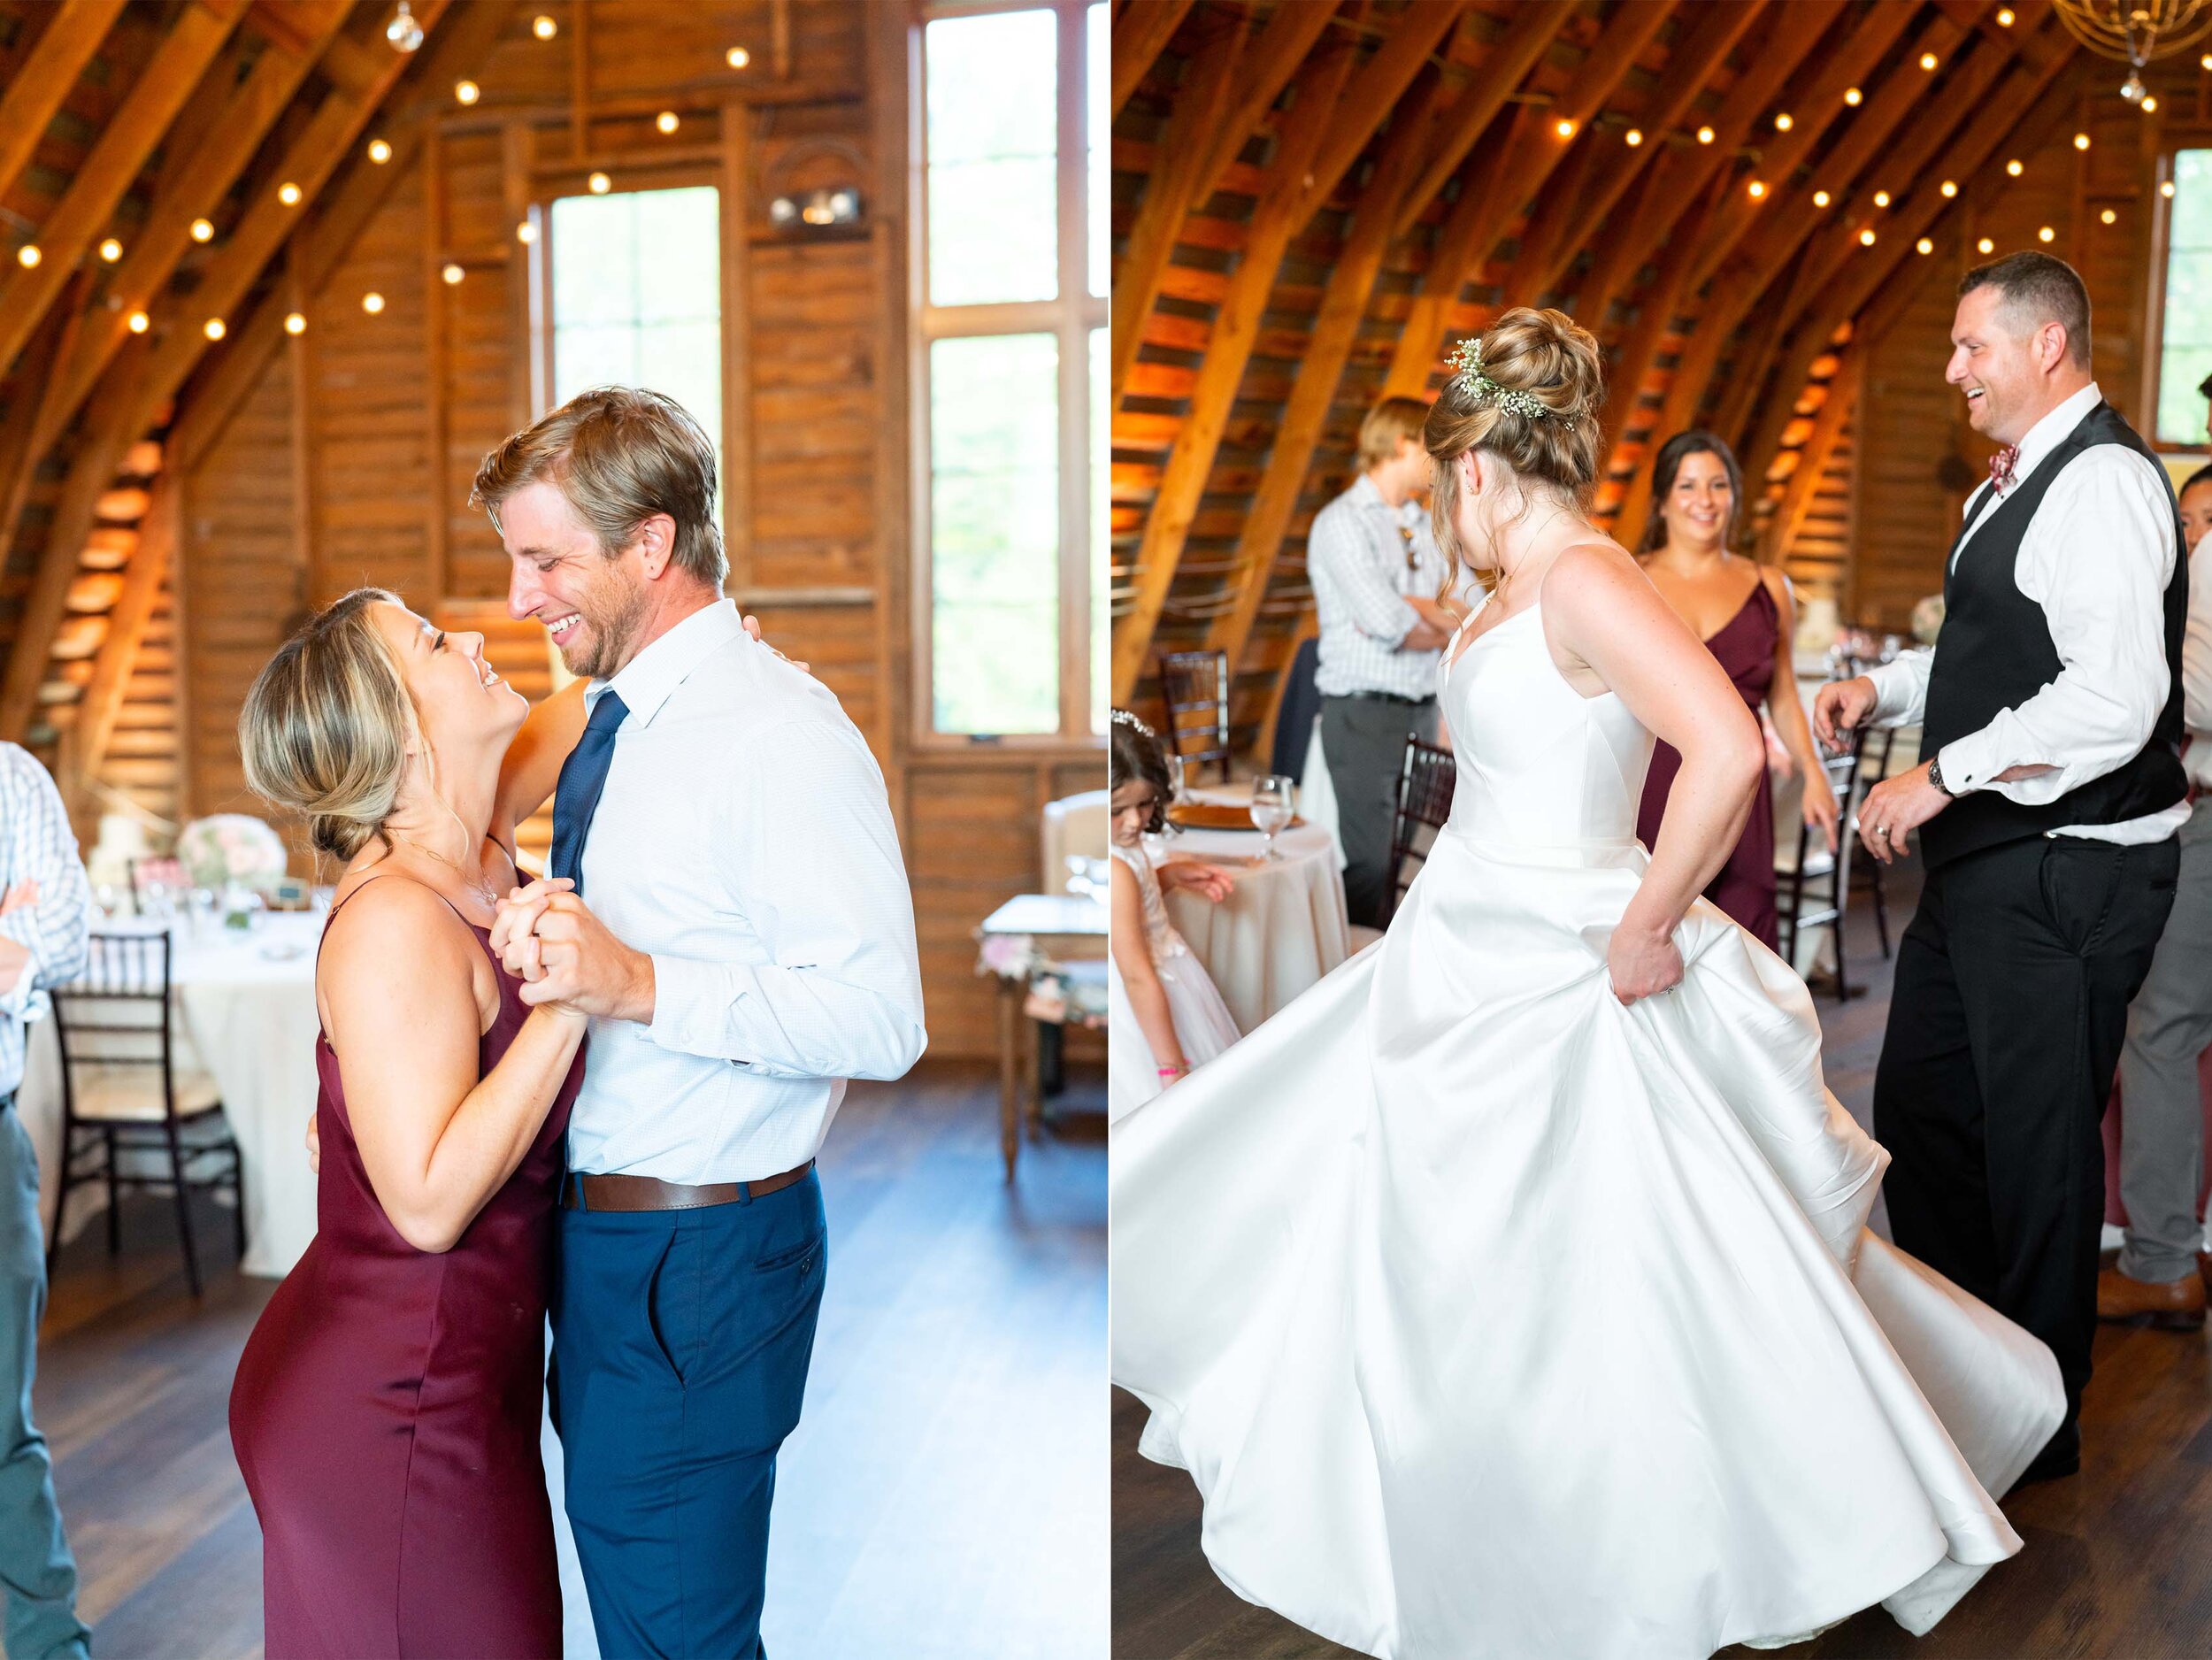 Couples dancing upstairs at the barn at 48 Fields